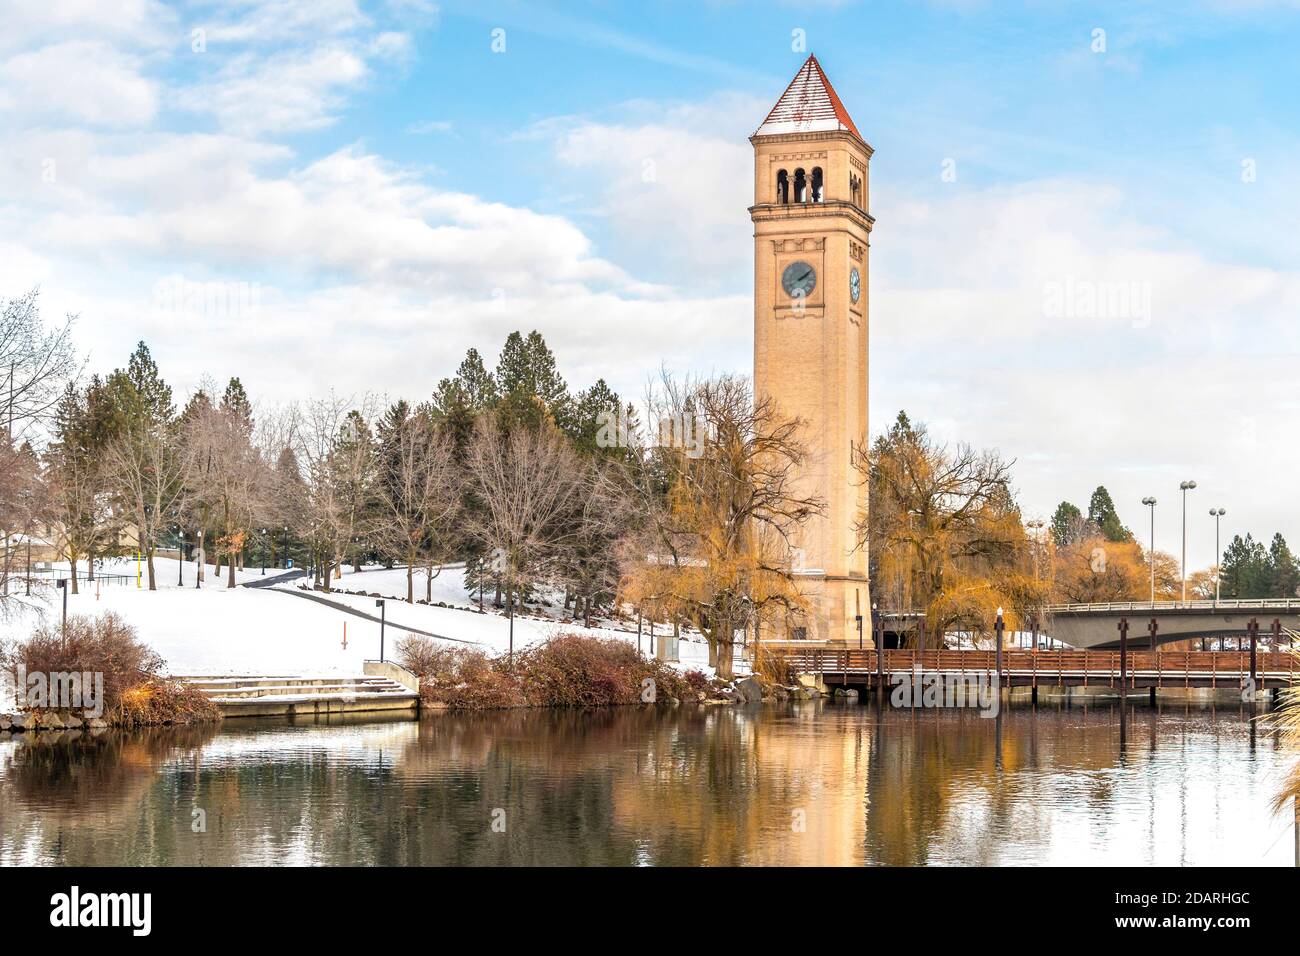 The Great Northern Clocktower, expo pavilion, and the Spokane River in Riverfront Park during an early autumn snowfall. Stock Photo